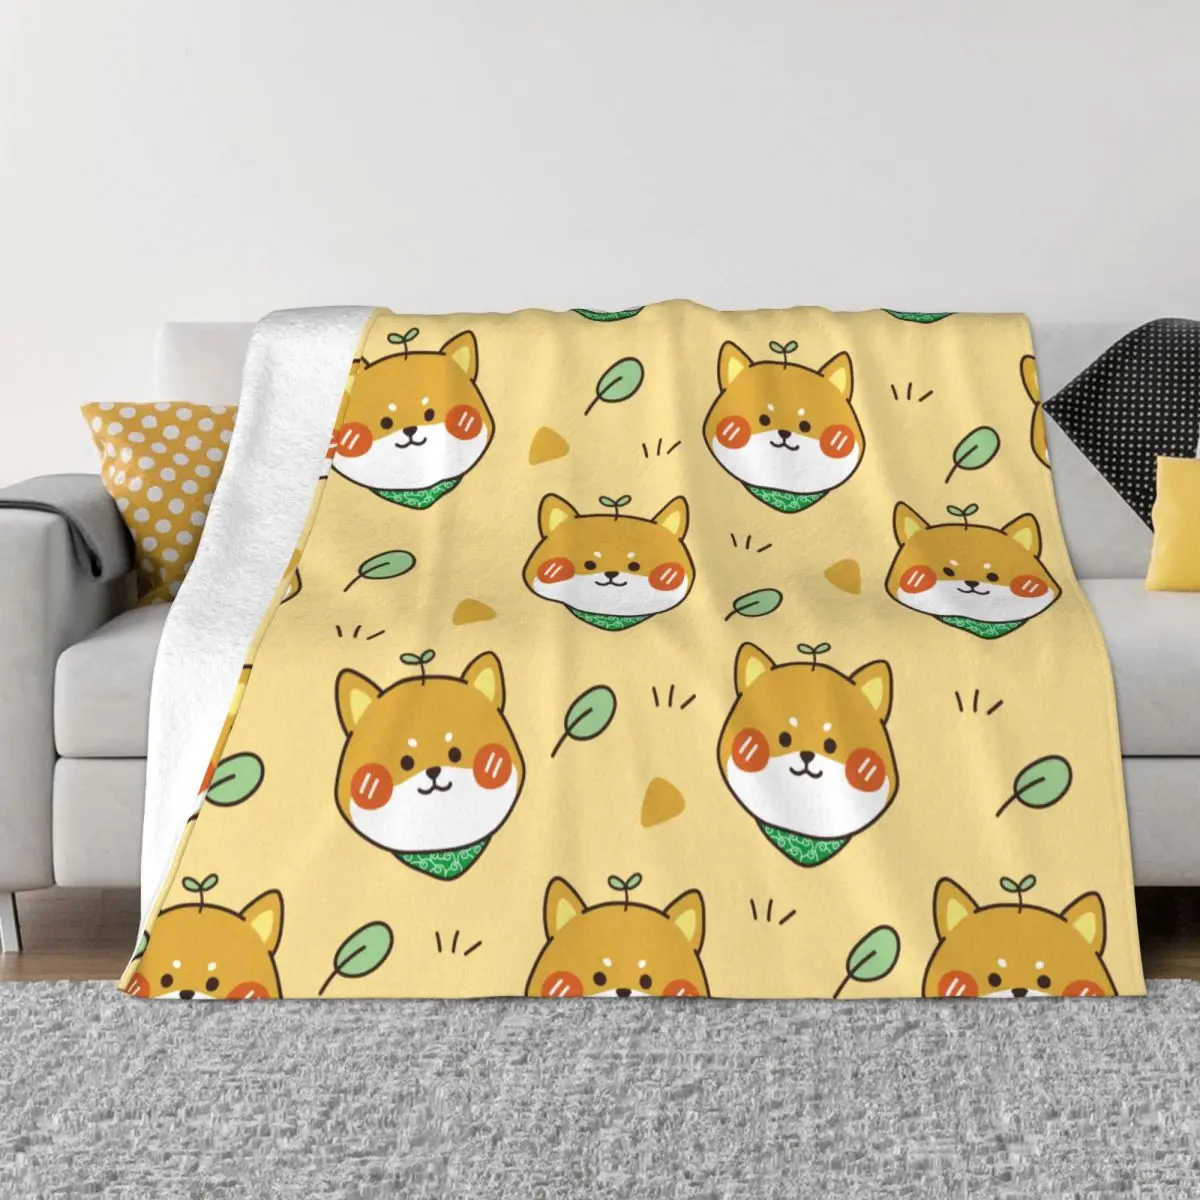 

Kawaii Shiba Inu Dog Blankets Flannel Printed Hand Drawn Pet Multi-function Soft Throw Blankets for Bed Bedroom Plush Thin Quilt